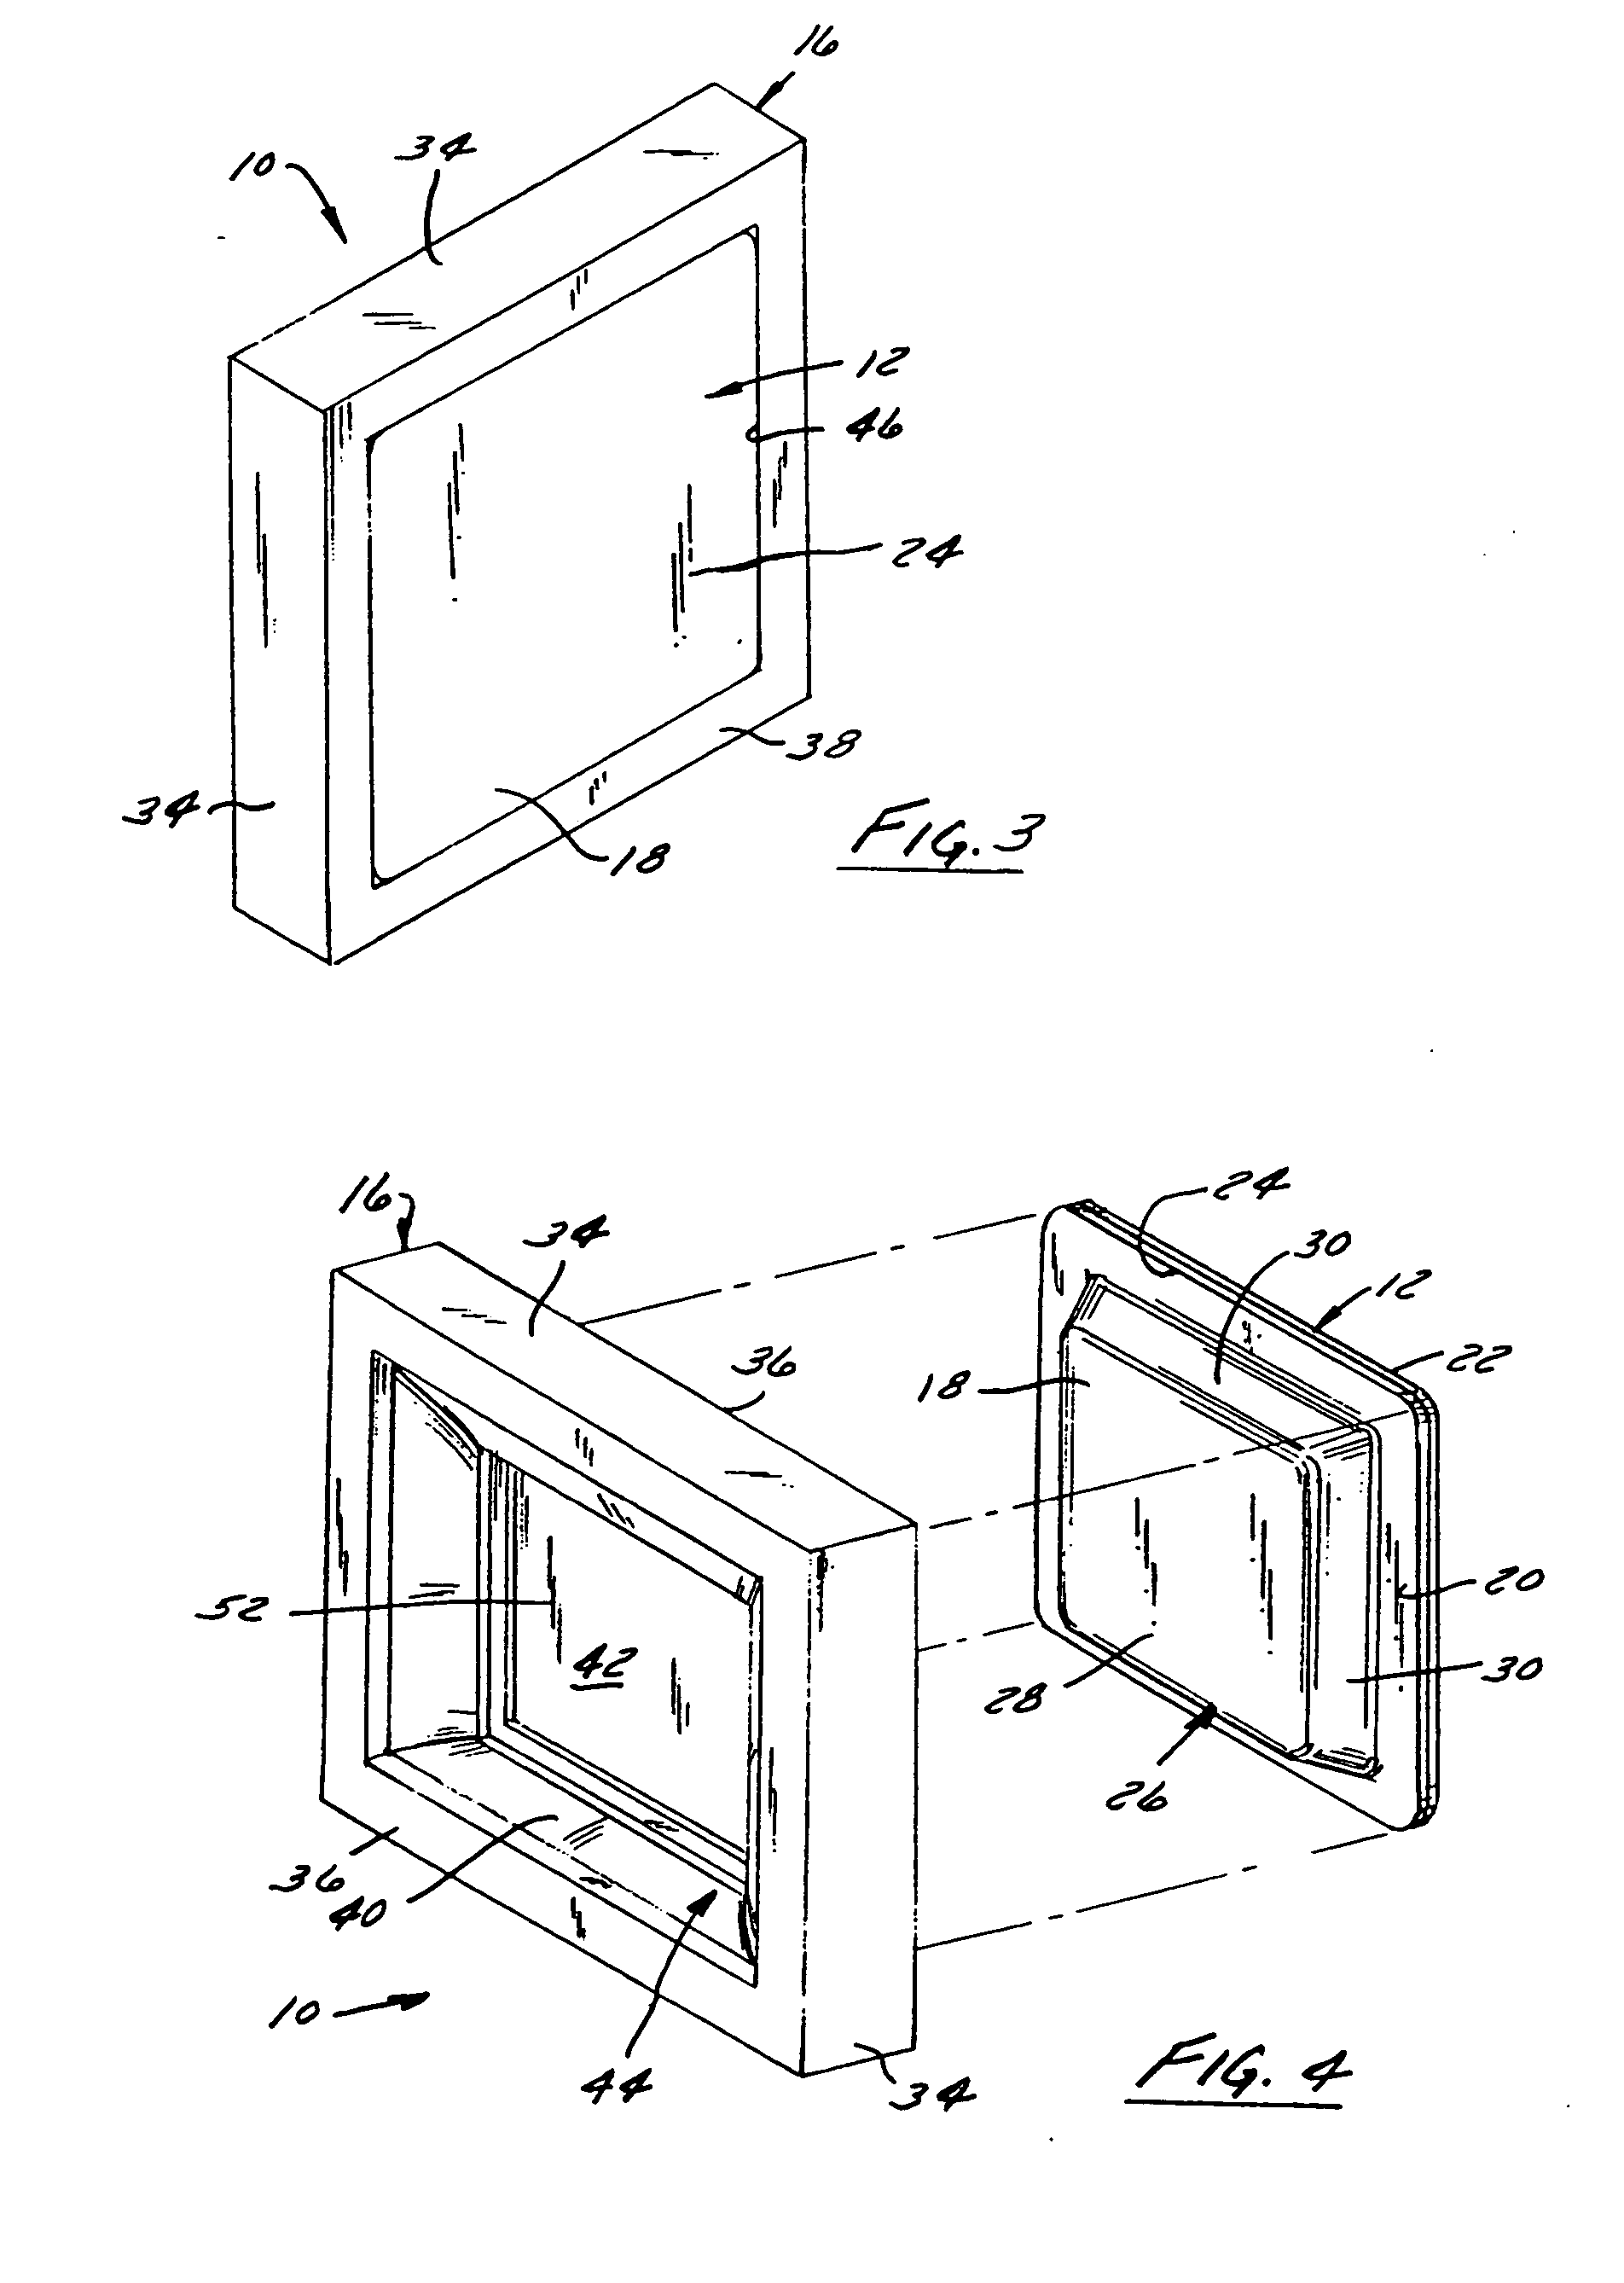 Volatile material dispensing system with illuminating device